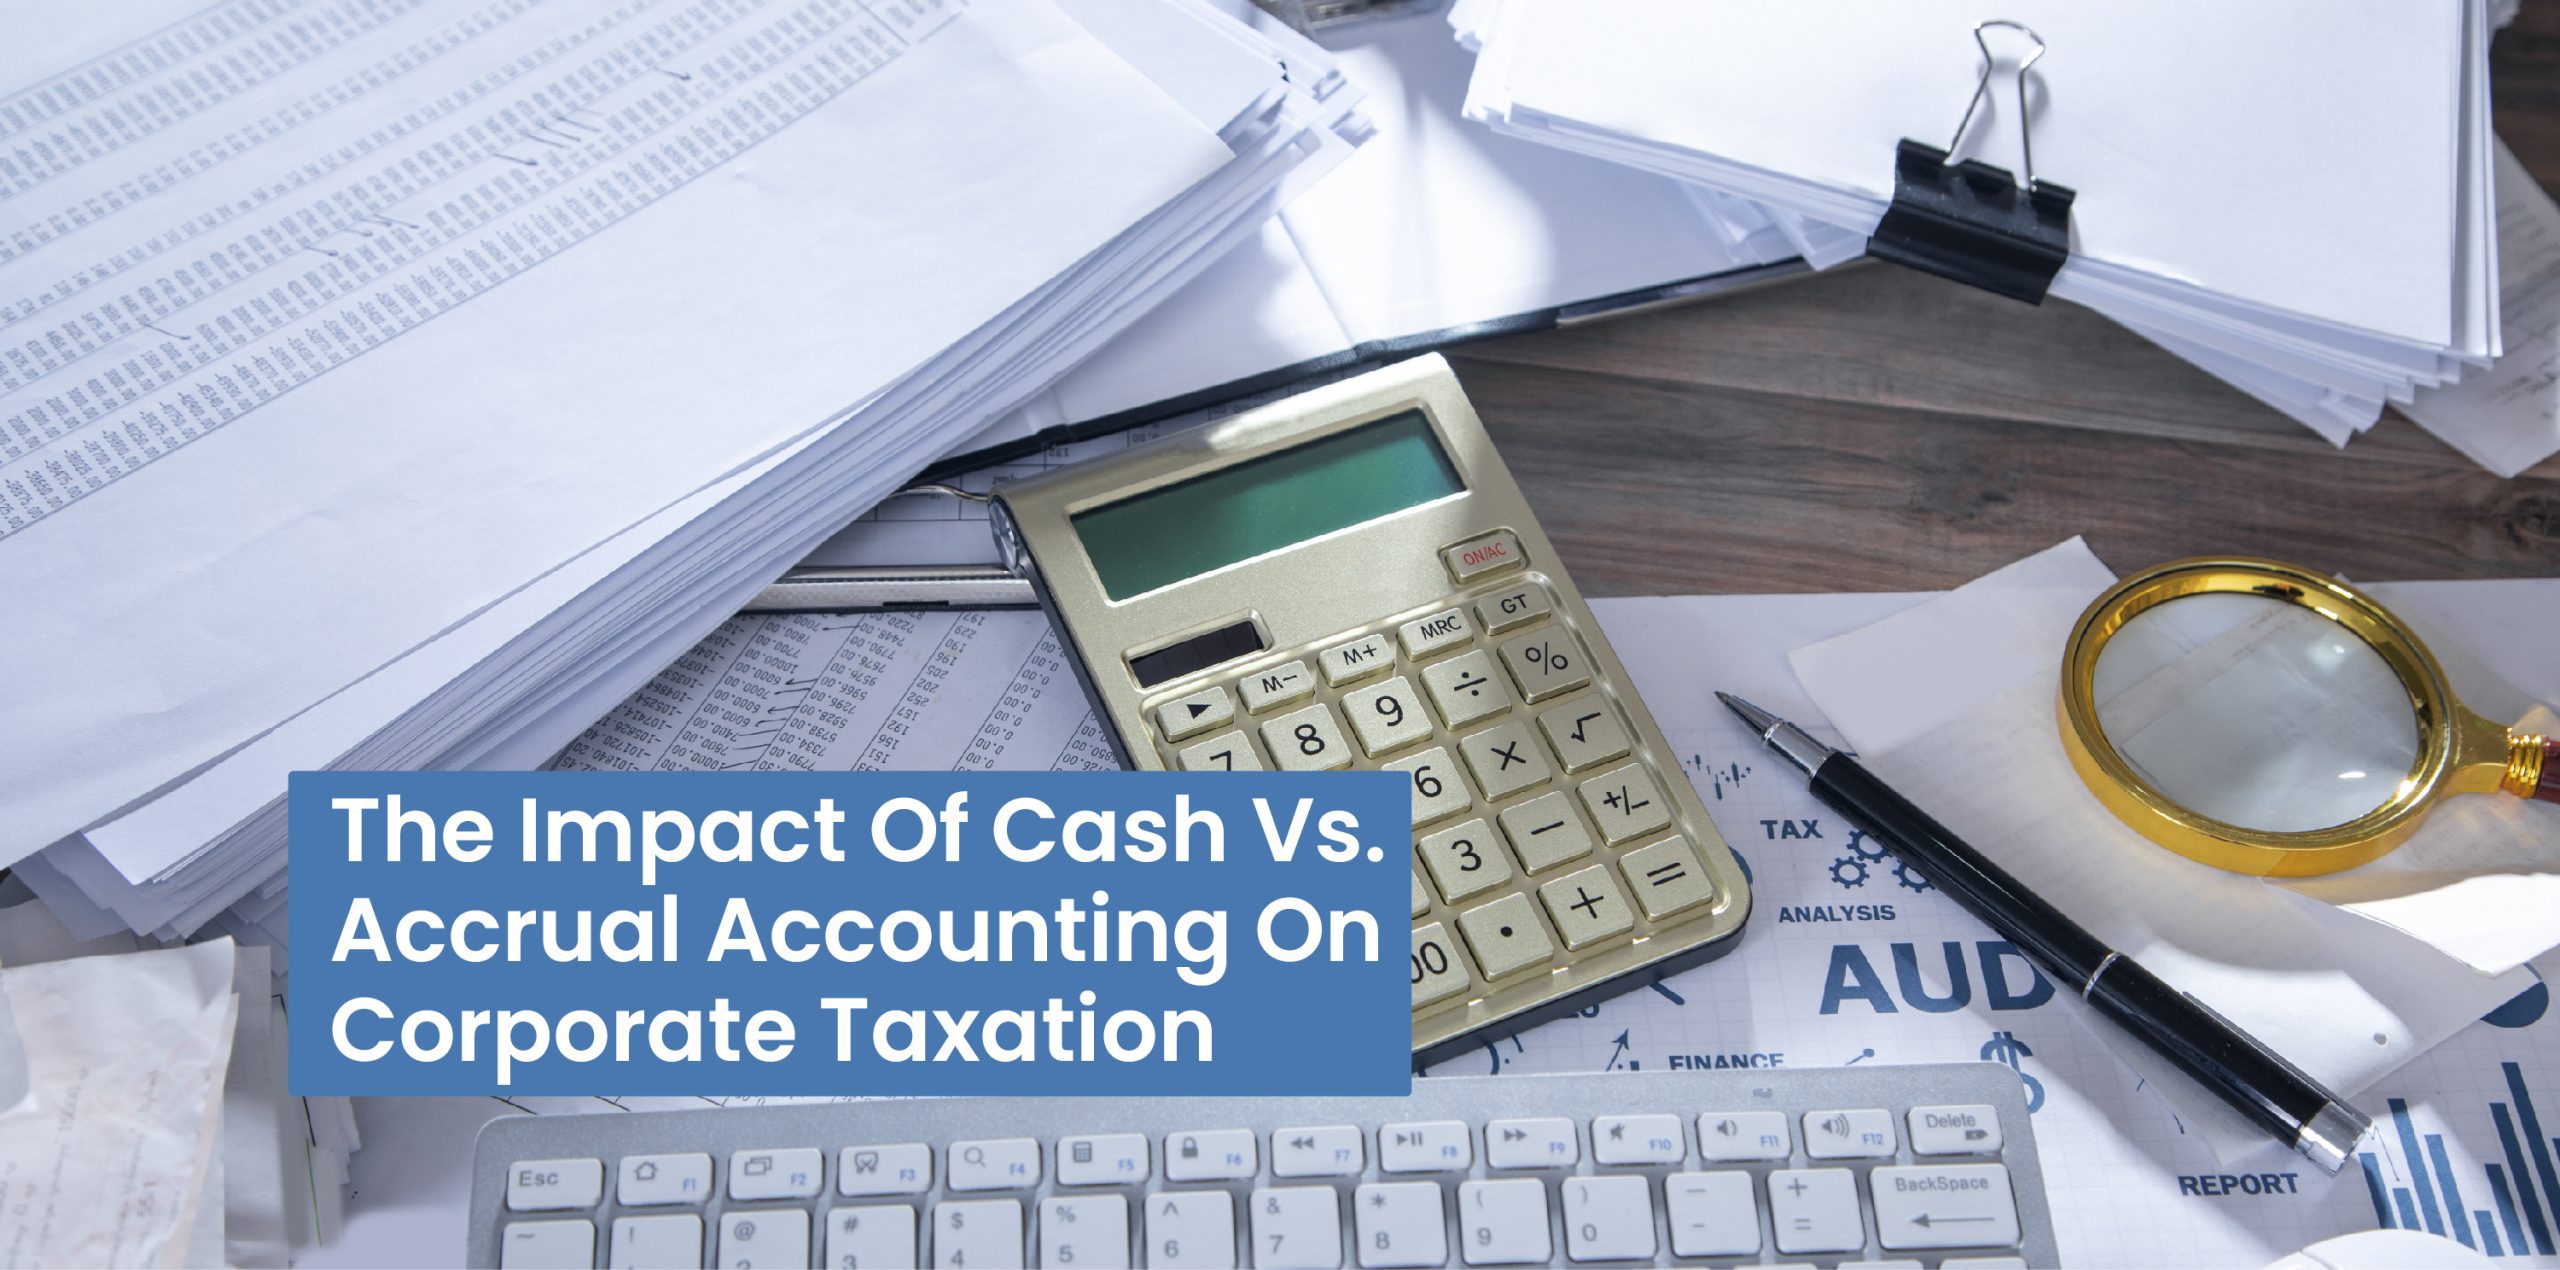 The Impact of Cash vs. Accrual Accounting on Corporate Taxation